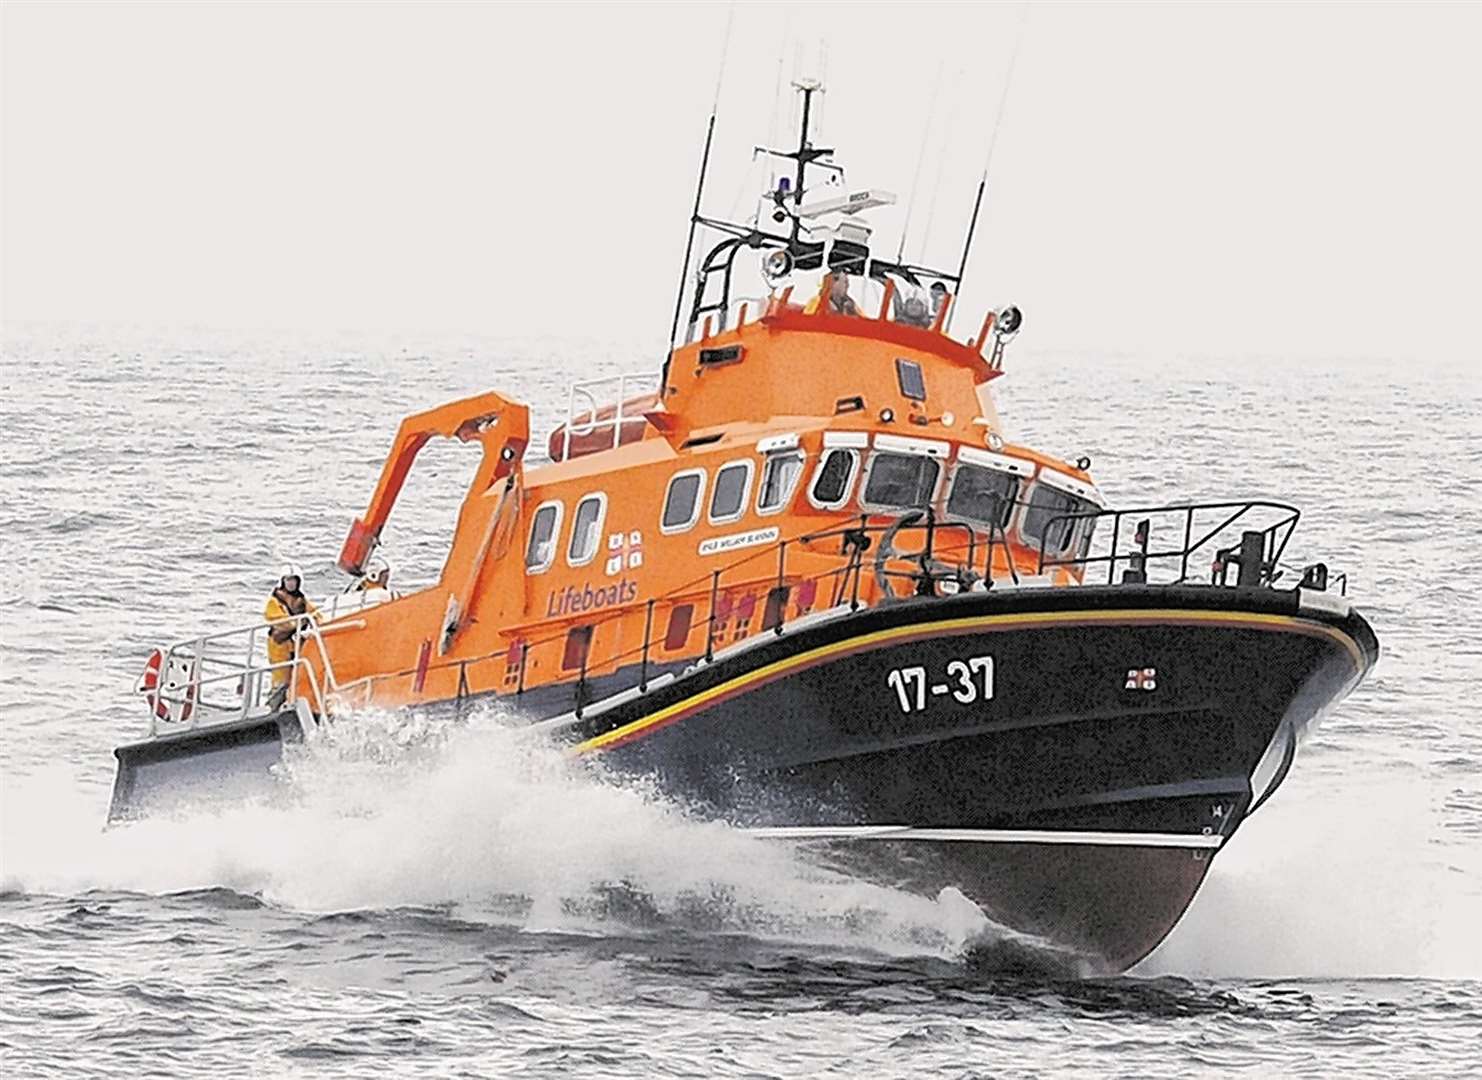 A training exercise turned into the real thing for the crew of the William Blannin.